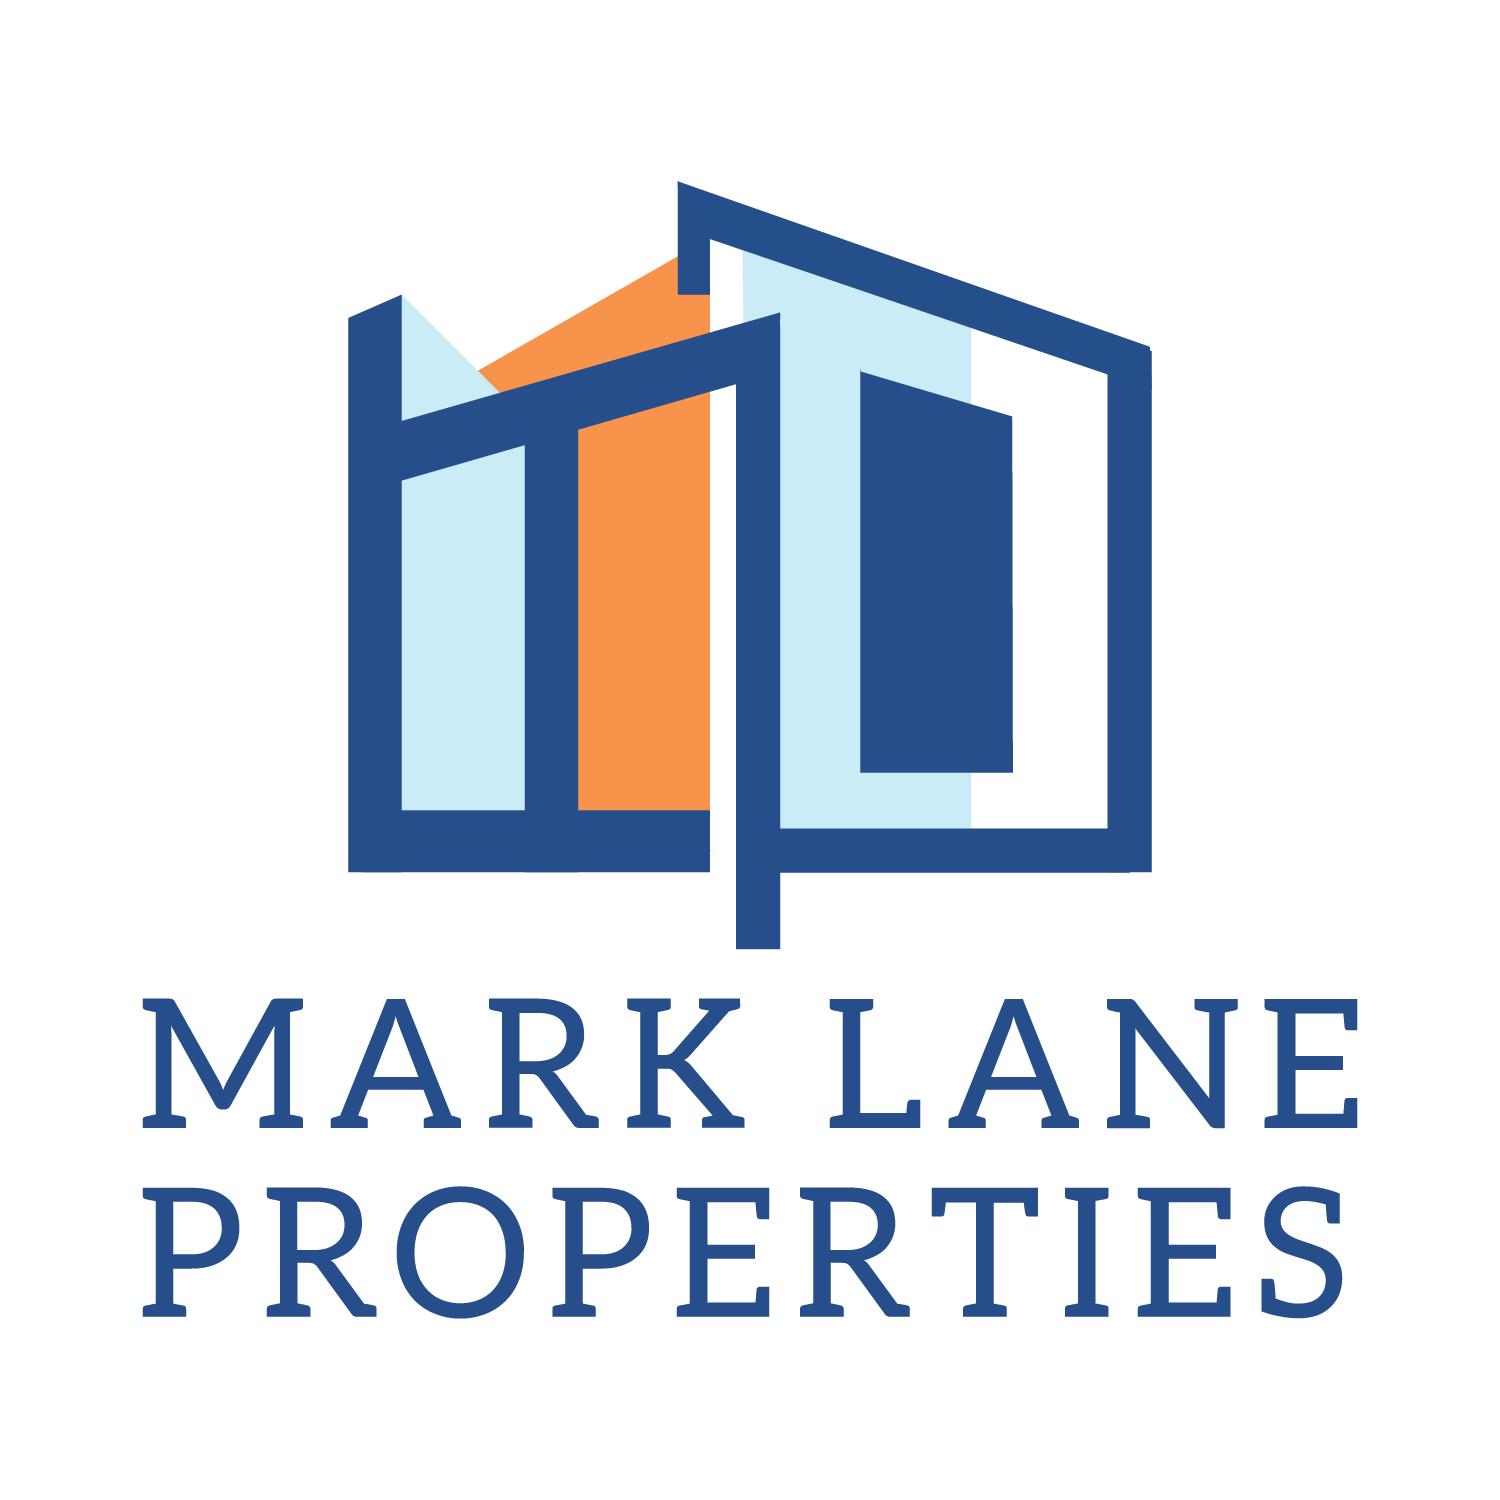 Did You Know? — Mark Lane Properties